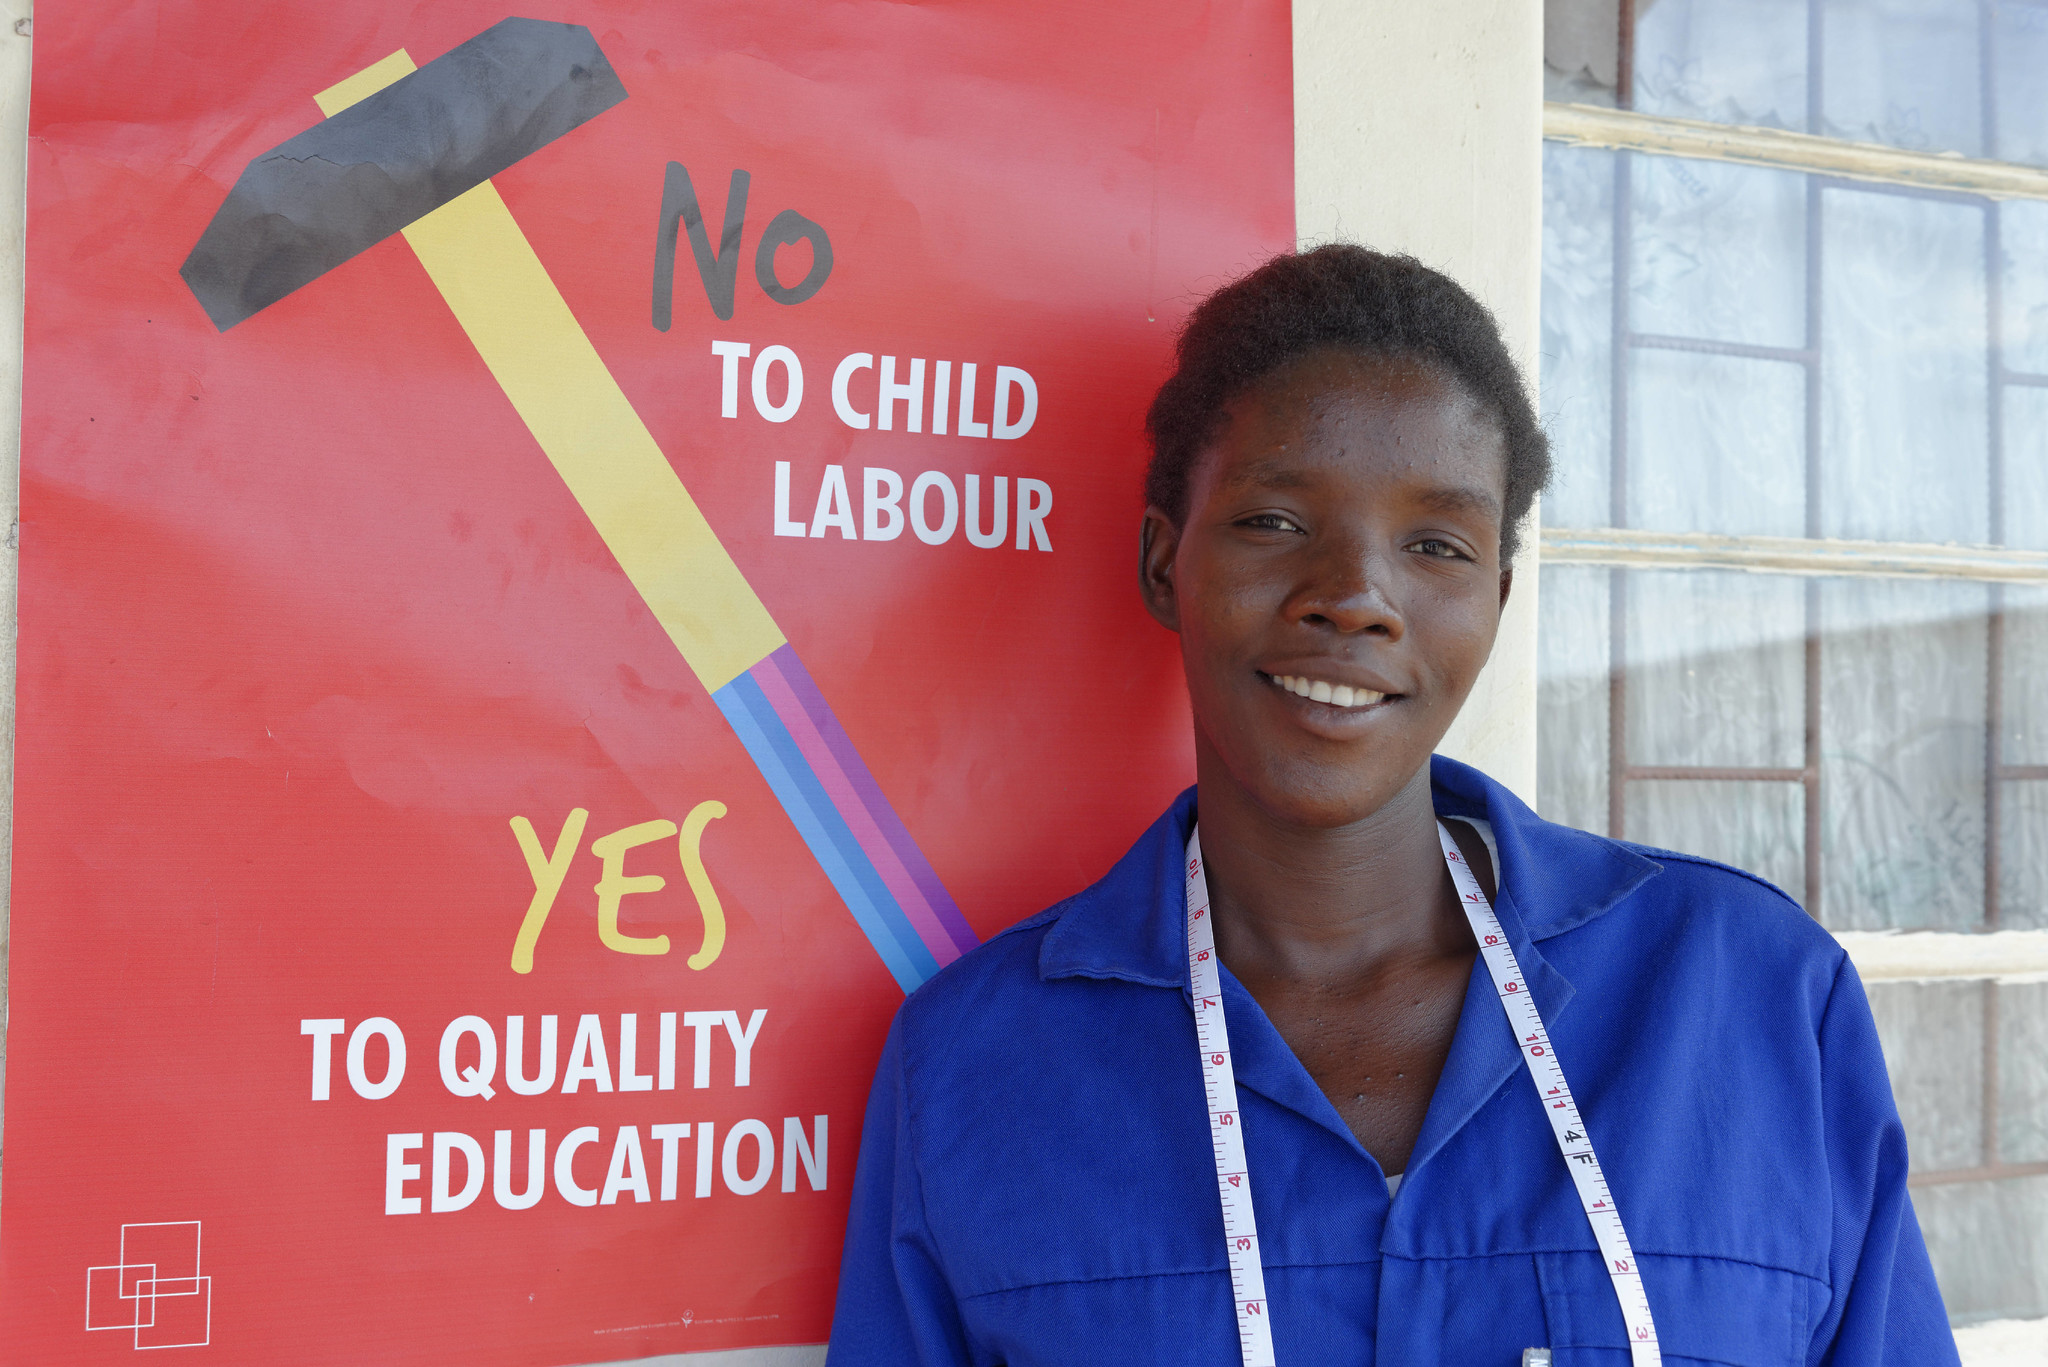 Young black lady with blue overalls and tape measure around her neck in front of an ILO Child Labour poster